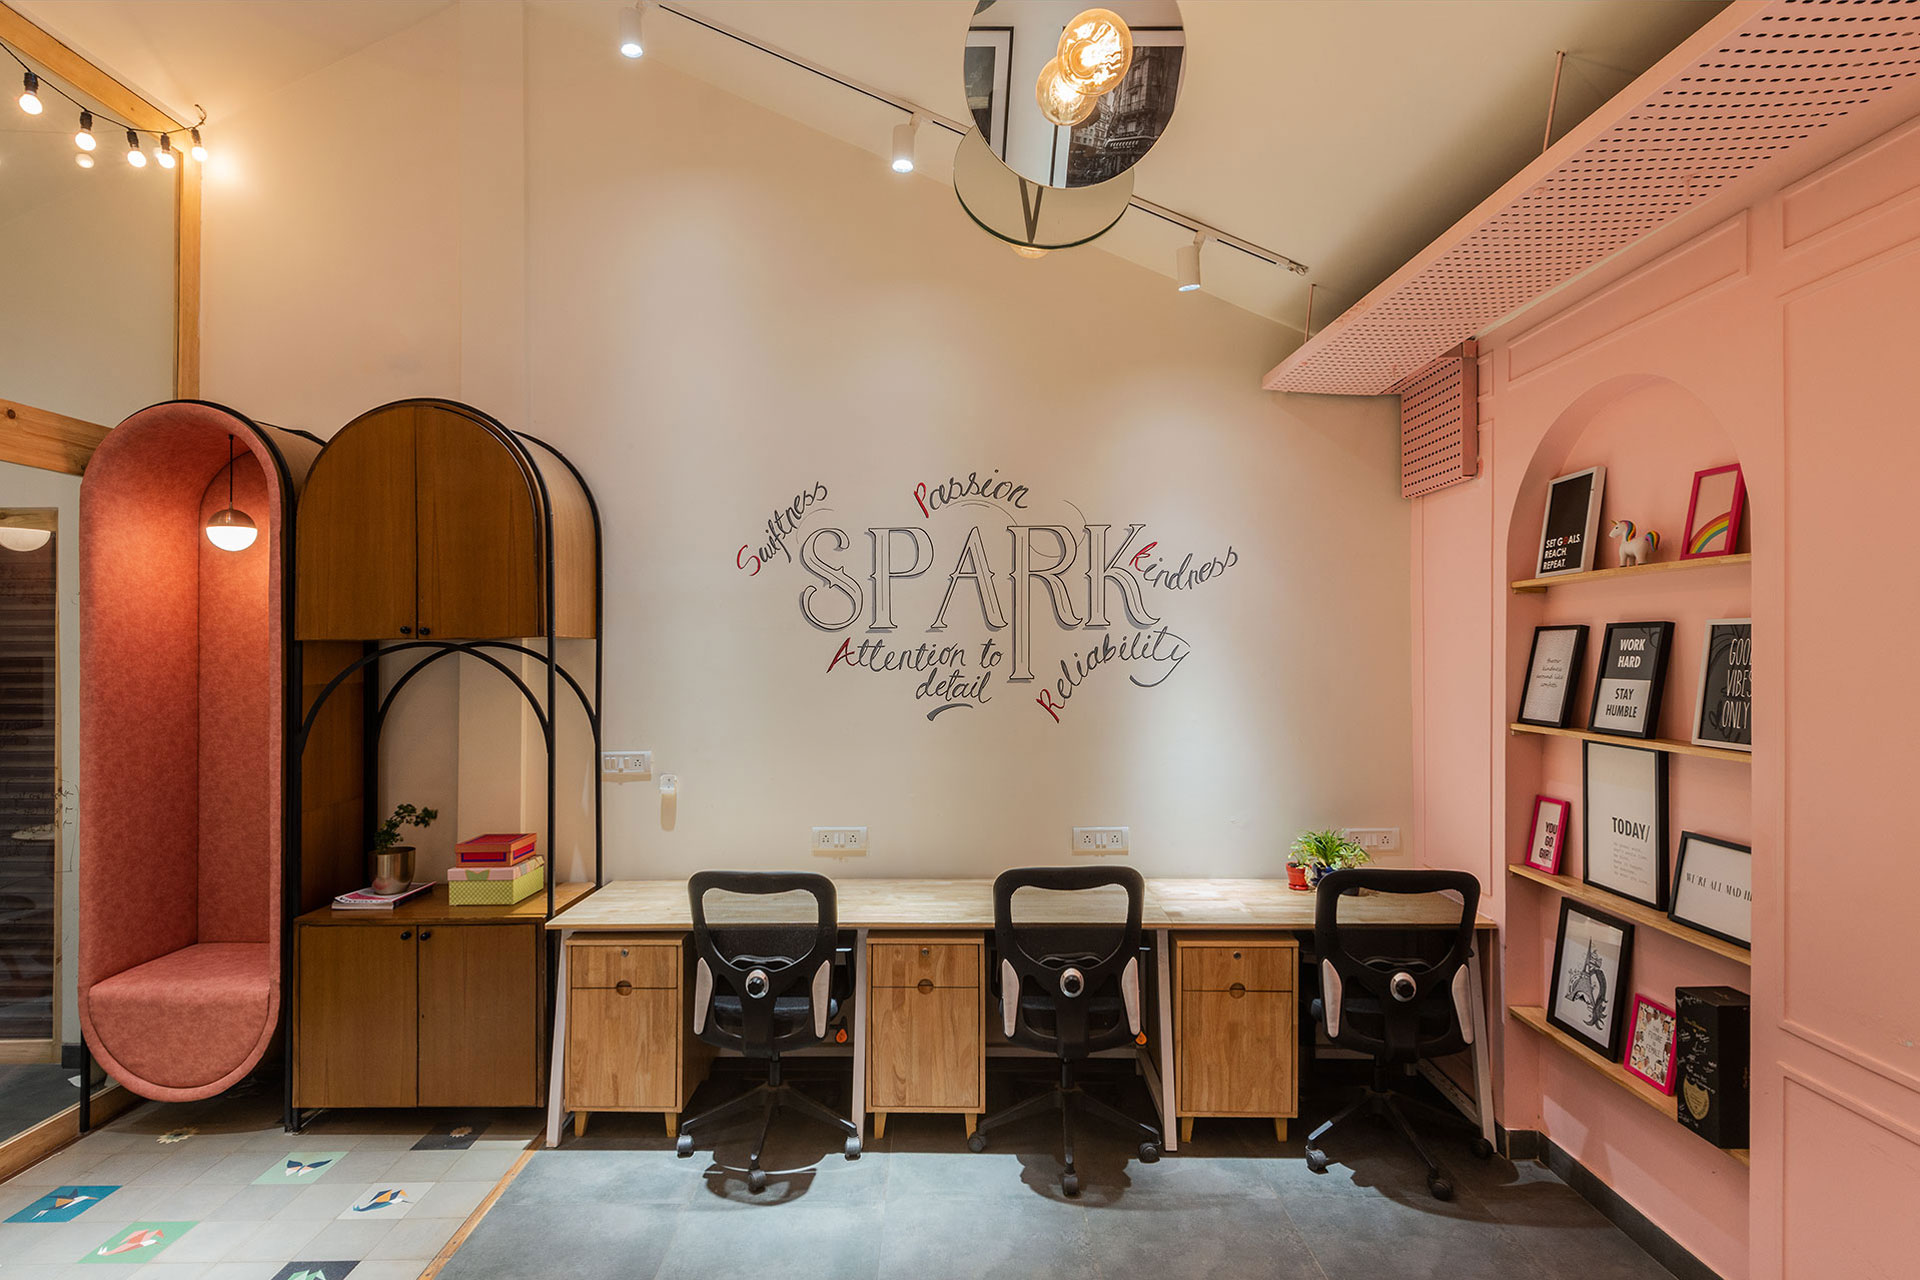 The pastel pink interiors are a reflection of the brand’s classic pink and white brand’s identity. Since the employees spend more time here than at their homes on any given day, creating cozy and comfortable workspace for the employees was one of the main design intent.